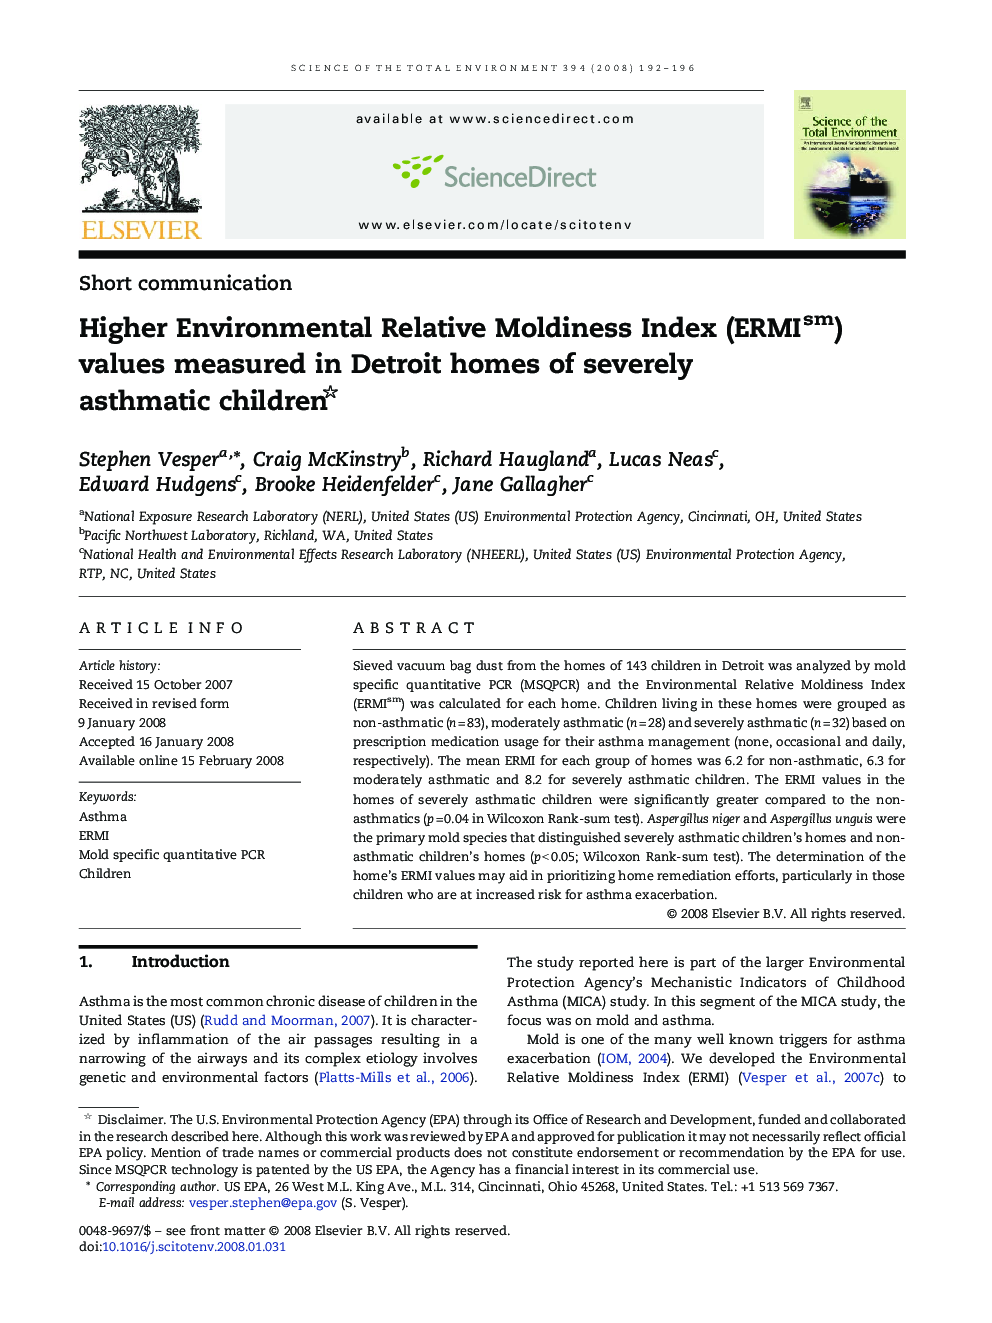 Higher Environmental Relative Moldiness Index (ERMIsm) values measured in Detroit homes of severely asthmatic children 